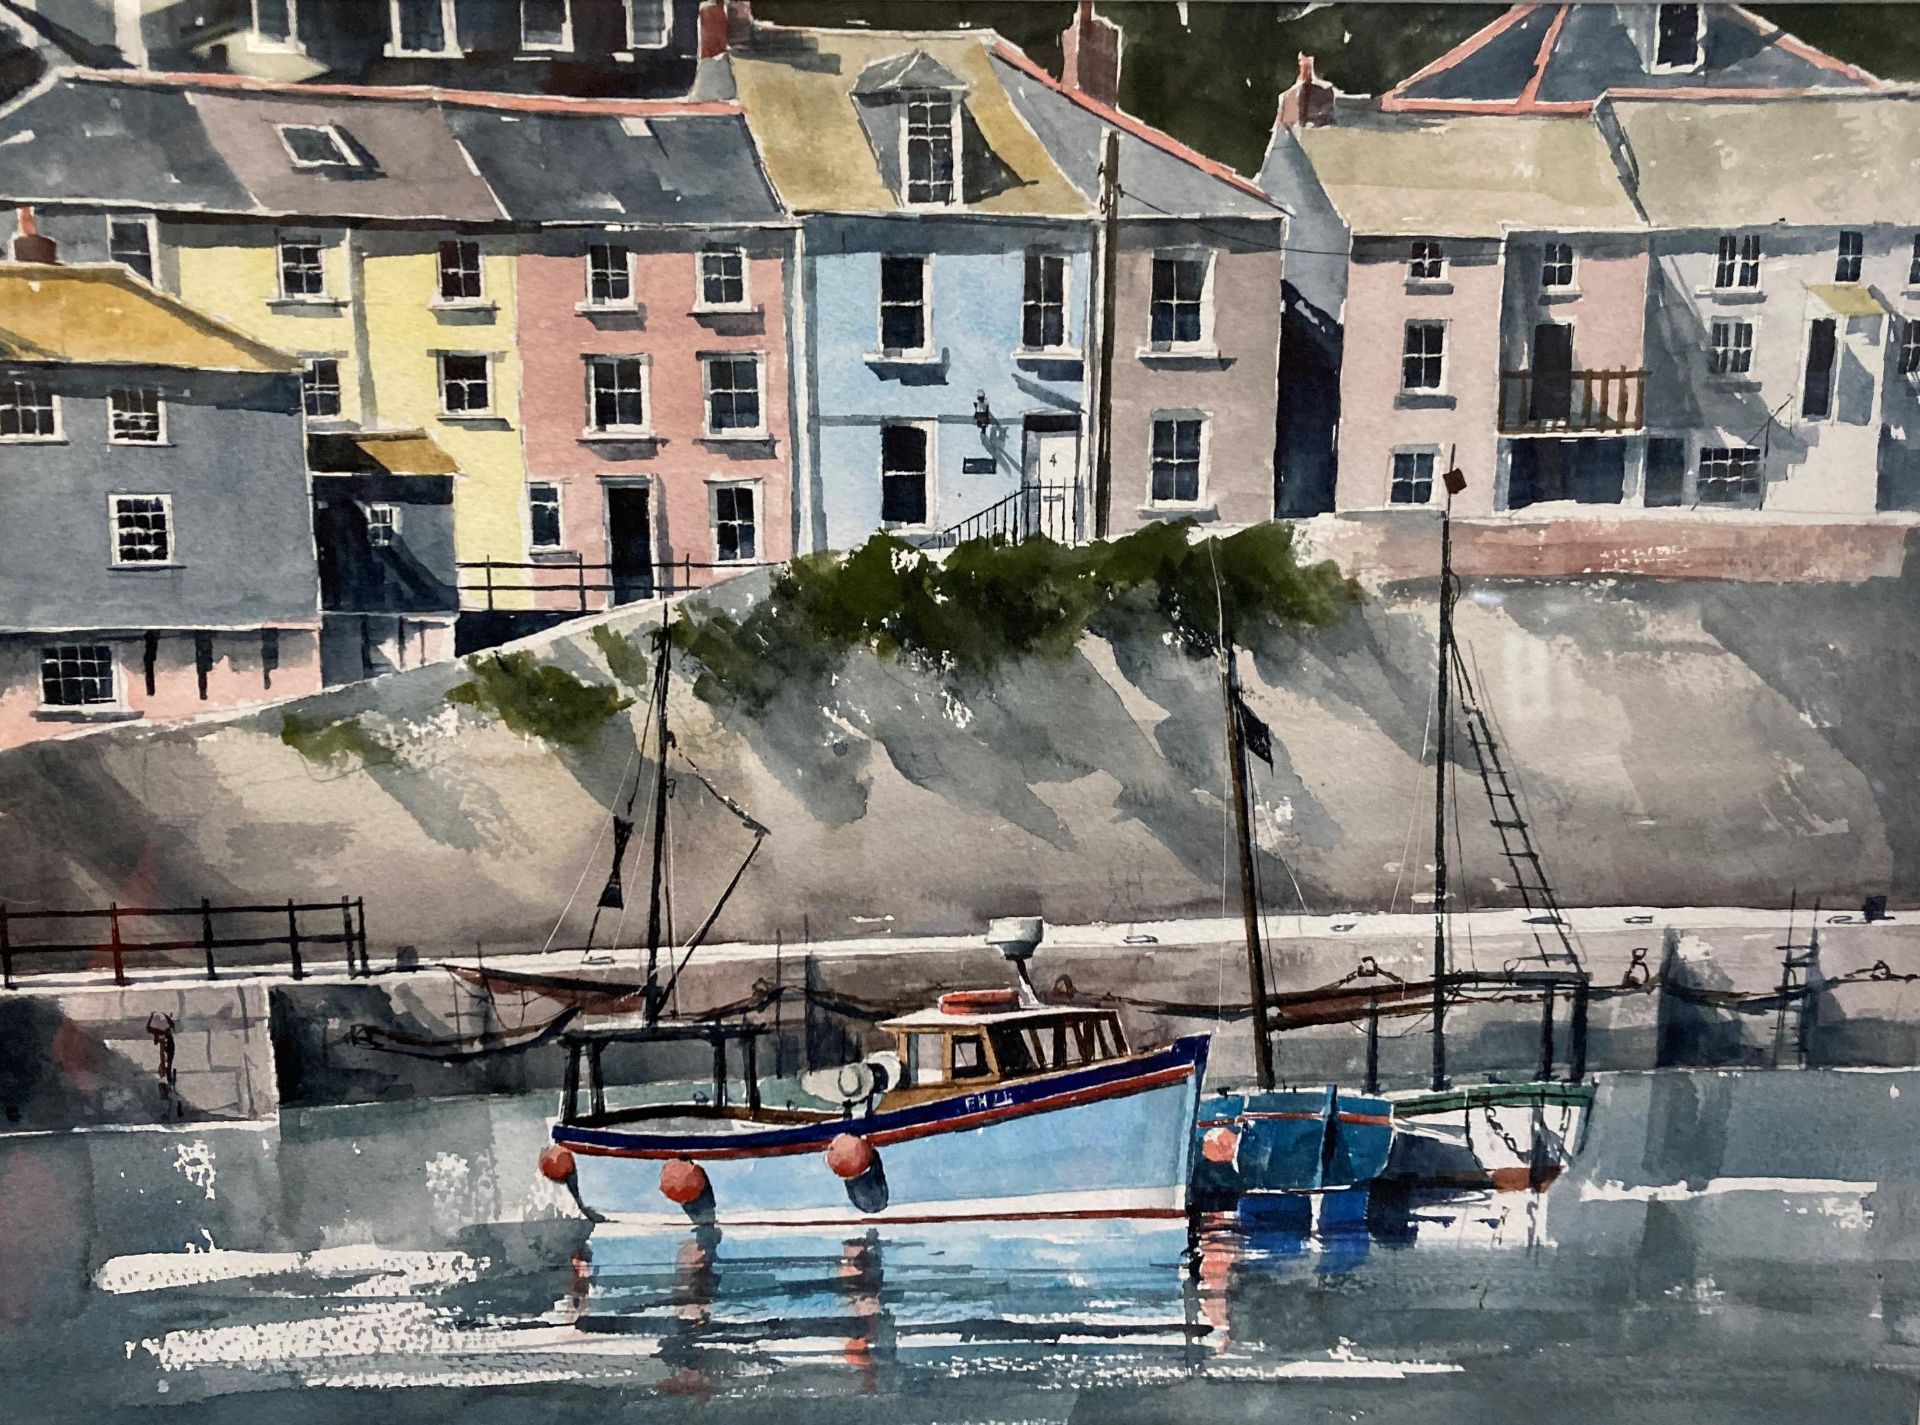 Jason L ? framed print 'Harbour with Houses in Background' 30cm x 42cm (Saleroom location: MA6) - Image 3 of 3